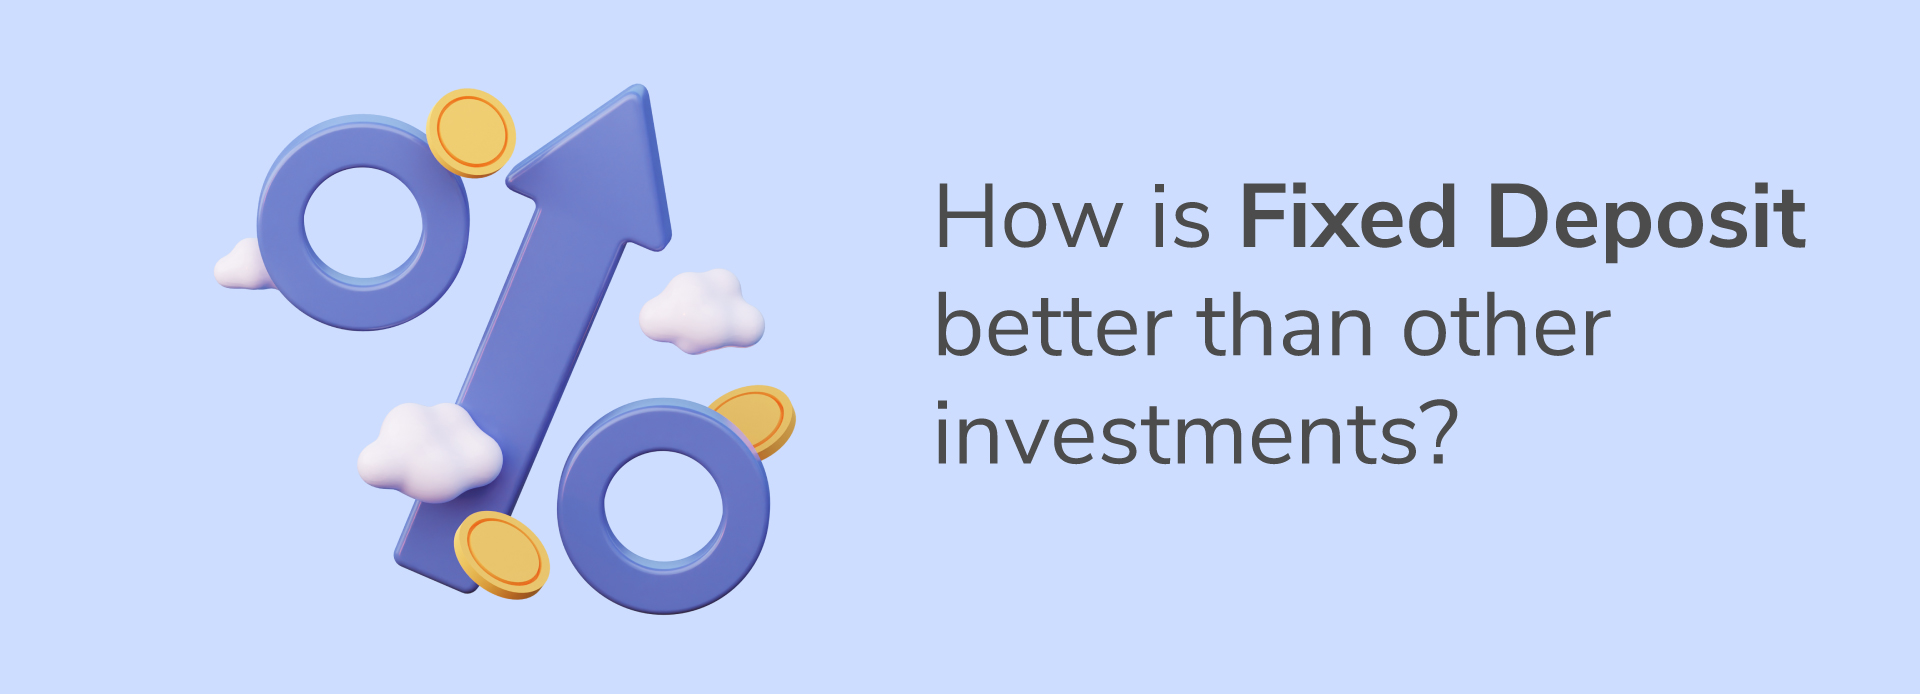 How is a Fixed Deposit better than other investments?